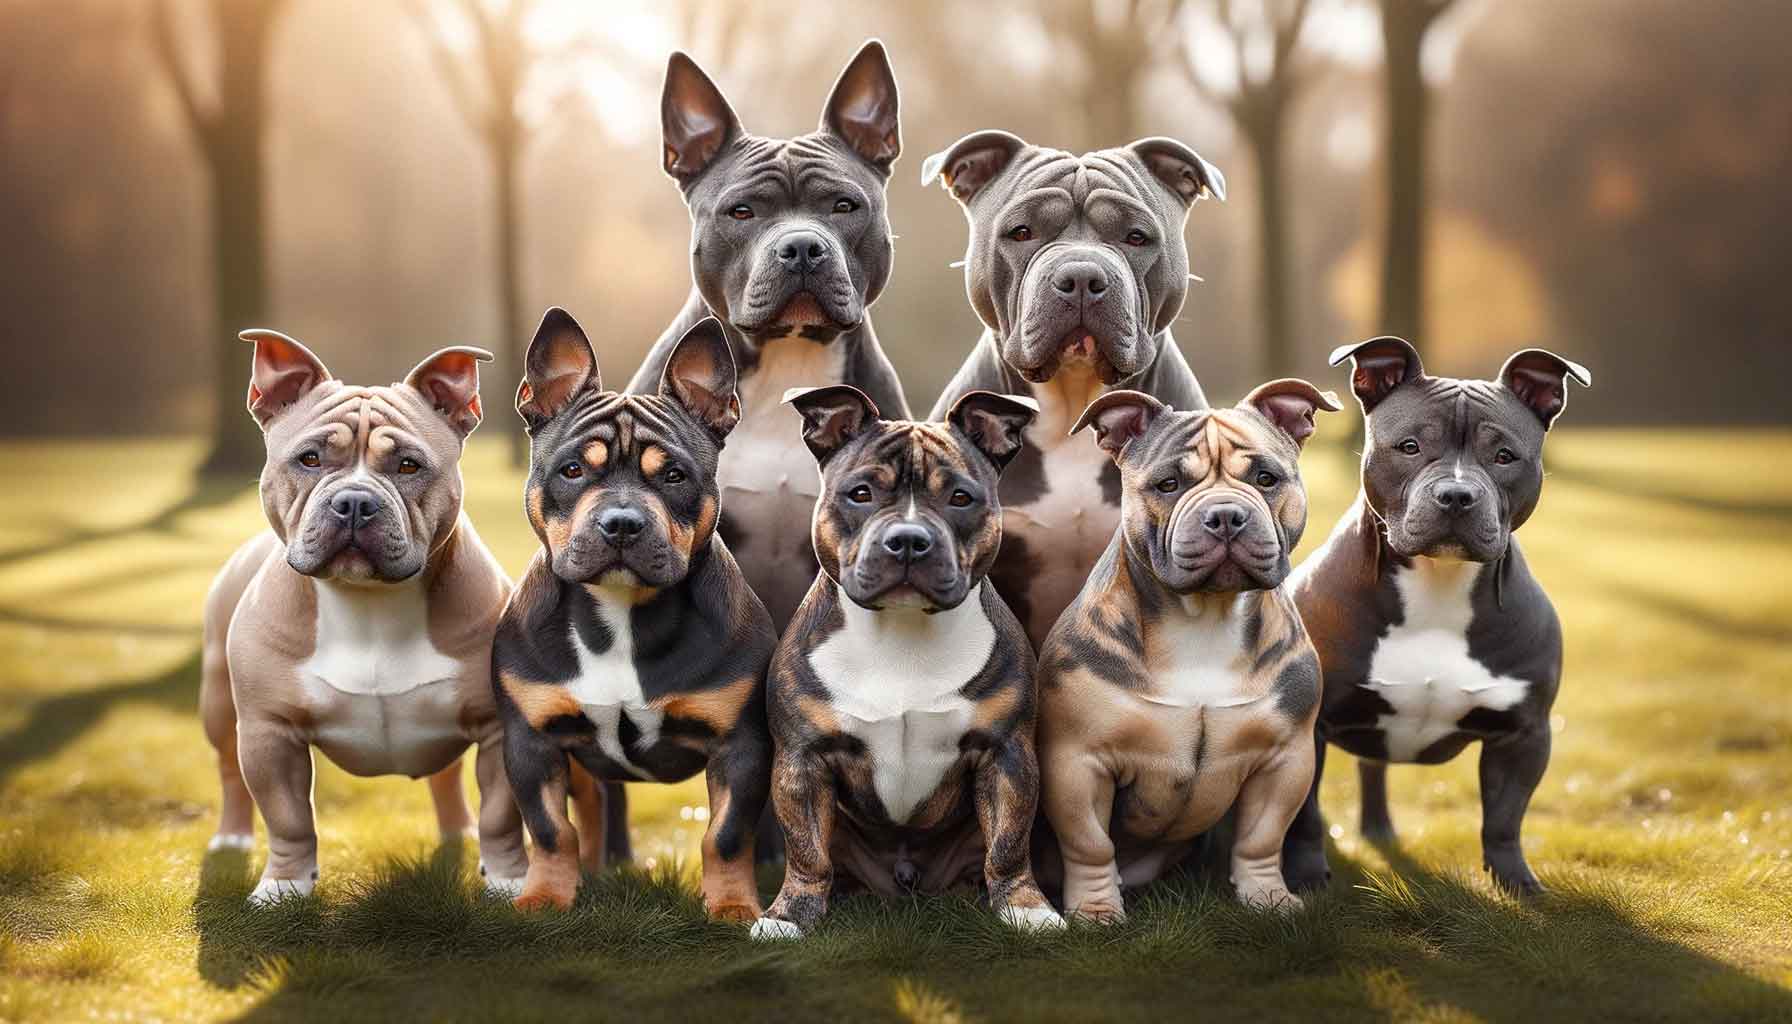 Diverse group of Micro Bully breeds posing together in an outdoor park, illuminated by soft sunlight.